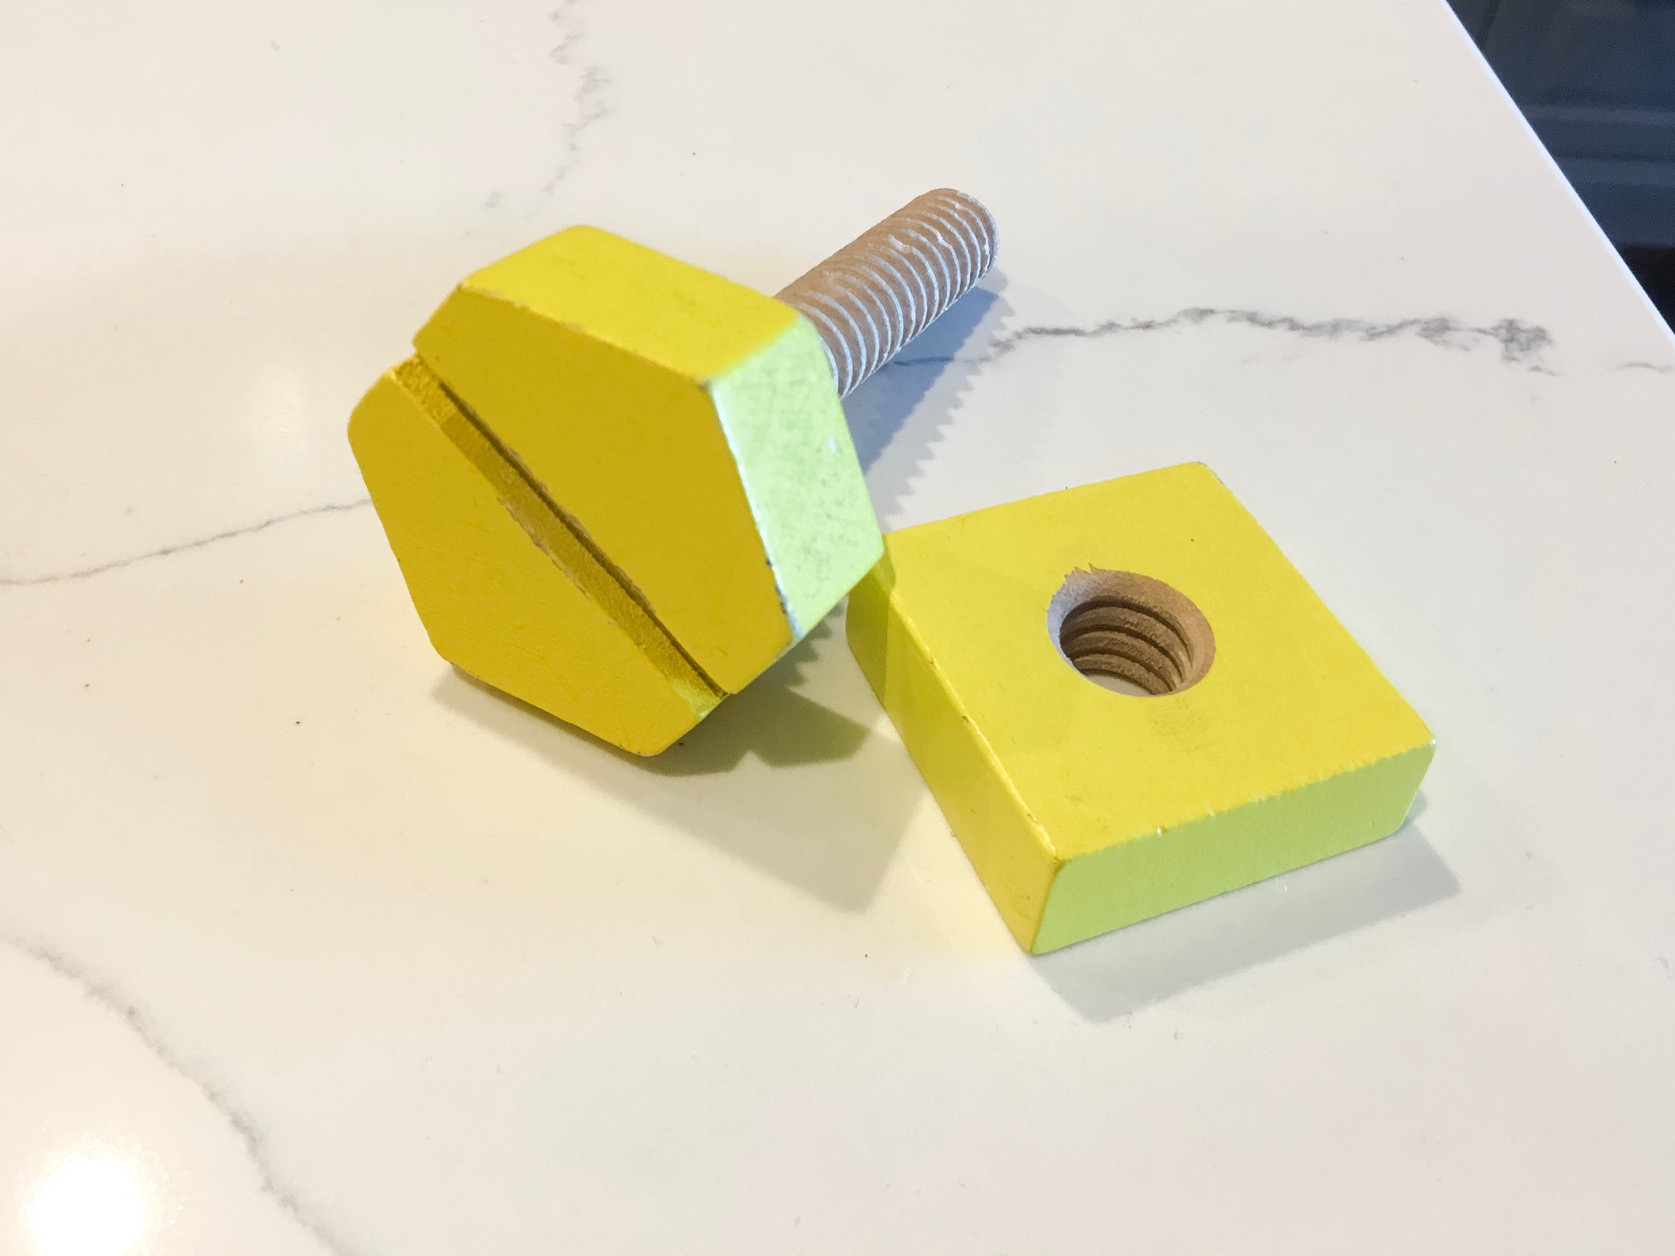 wood toy bolt and nut from toy building set is so cute and can be repurposed as decor in children's rooms